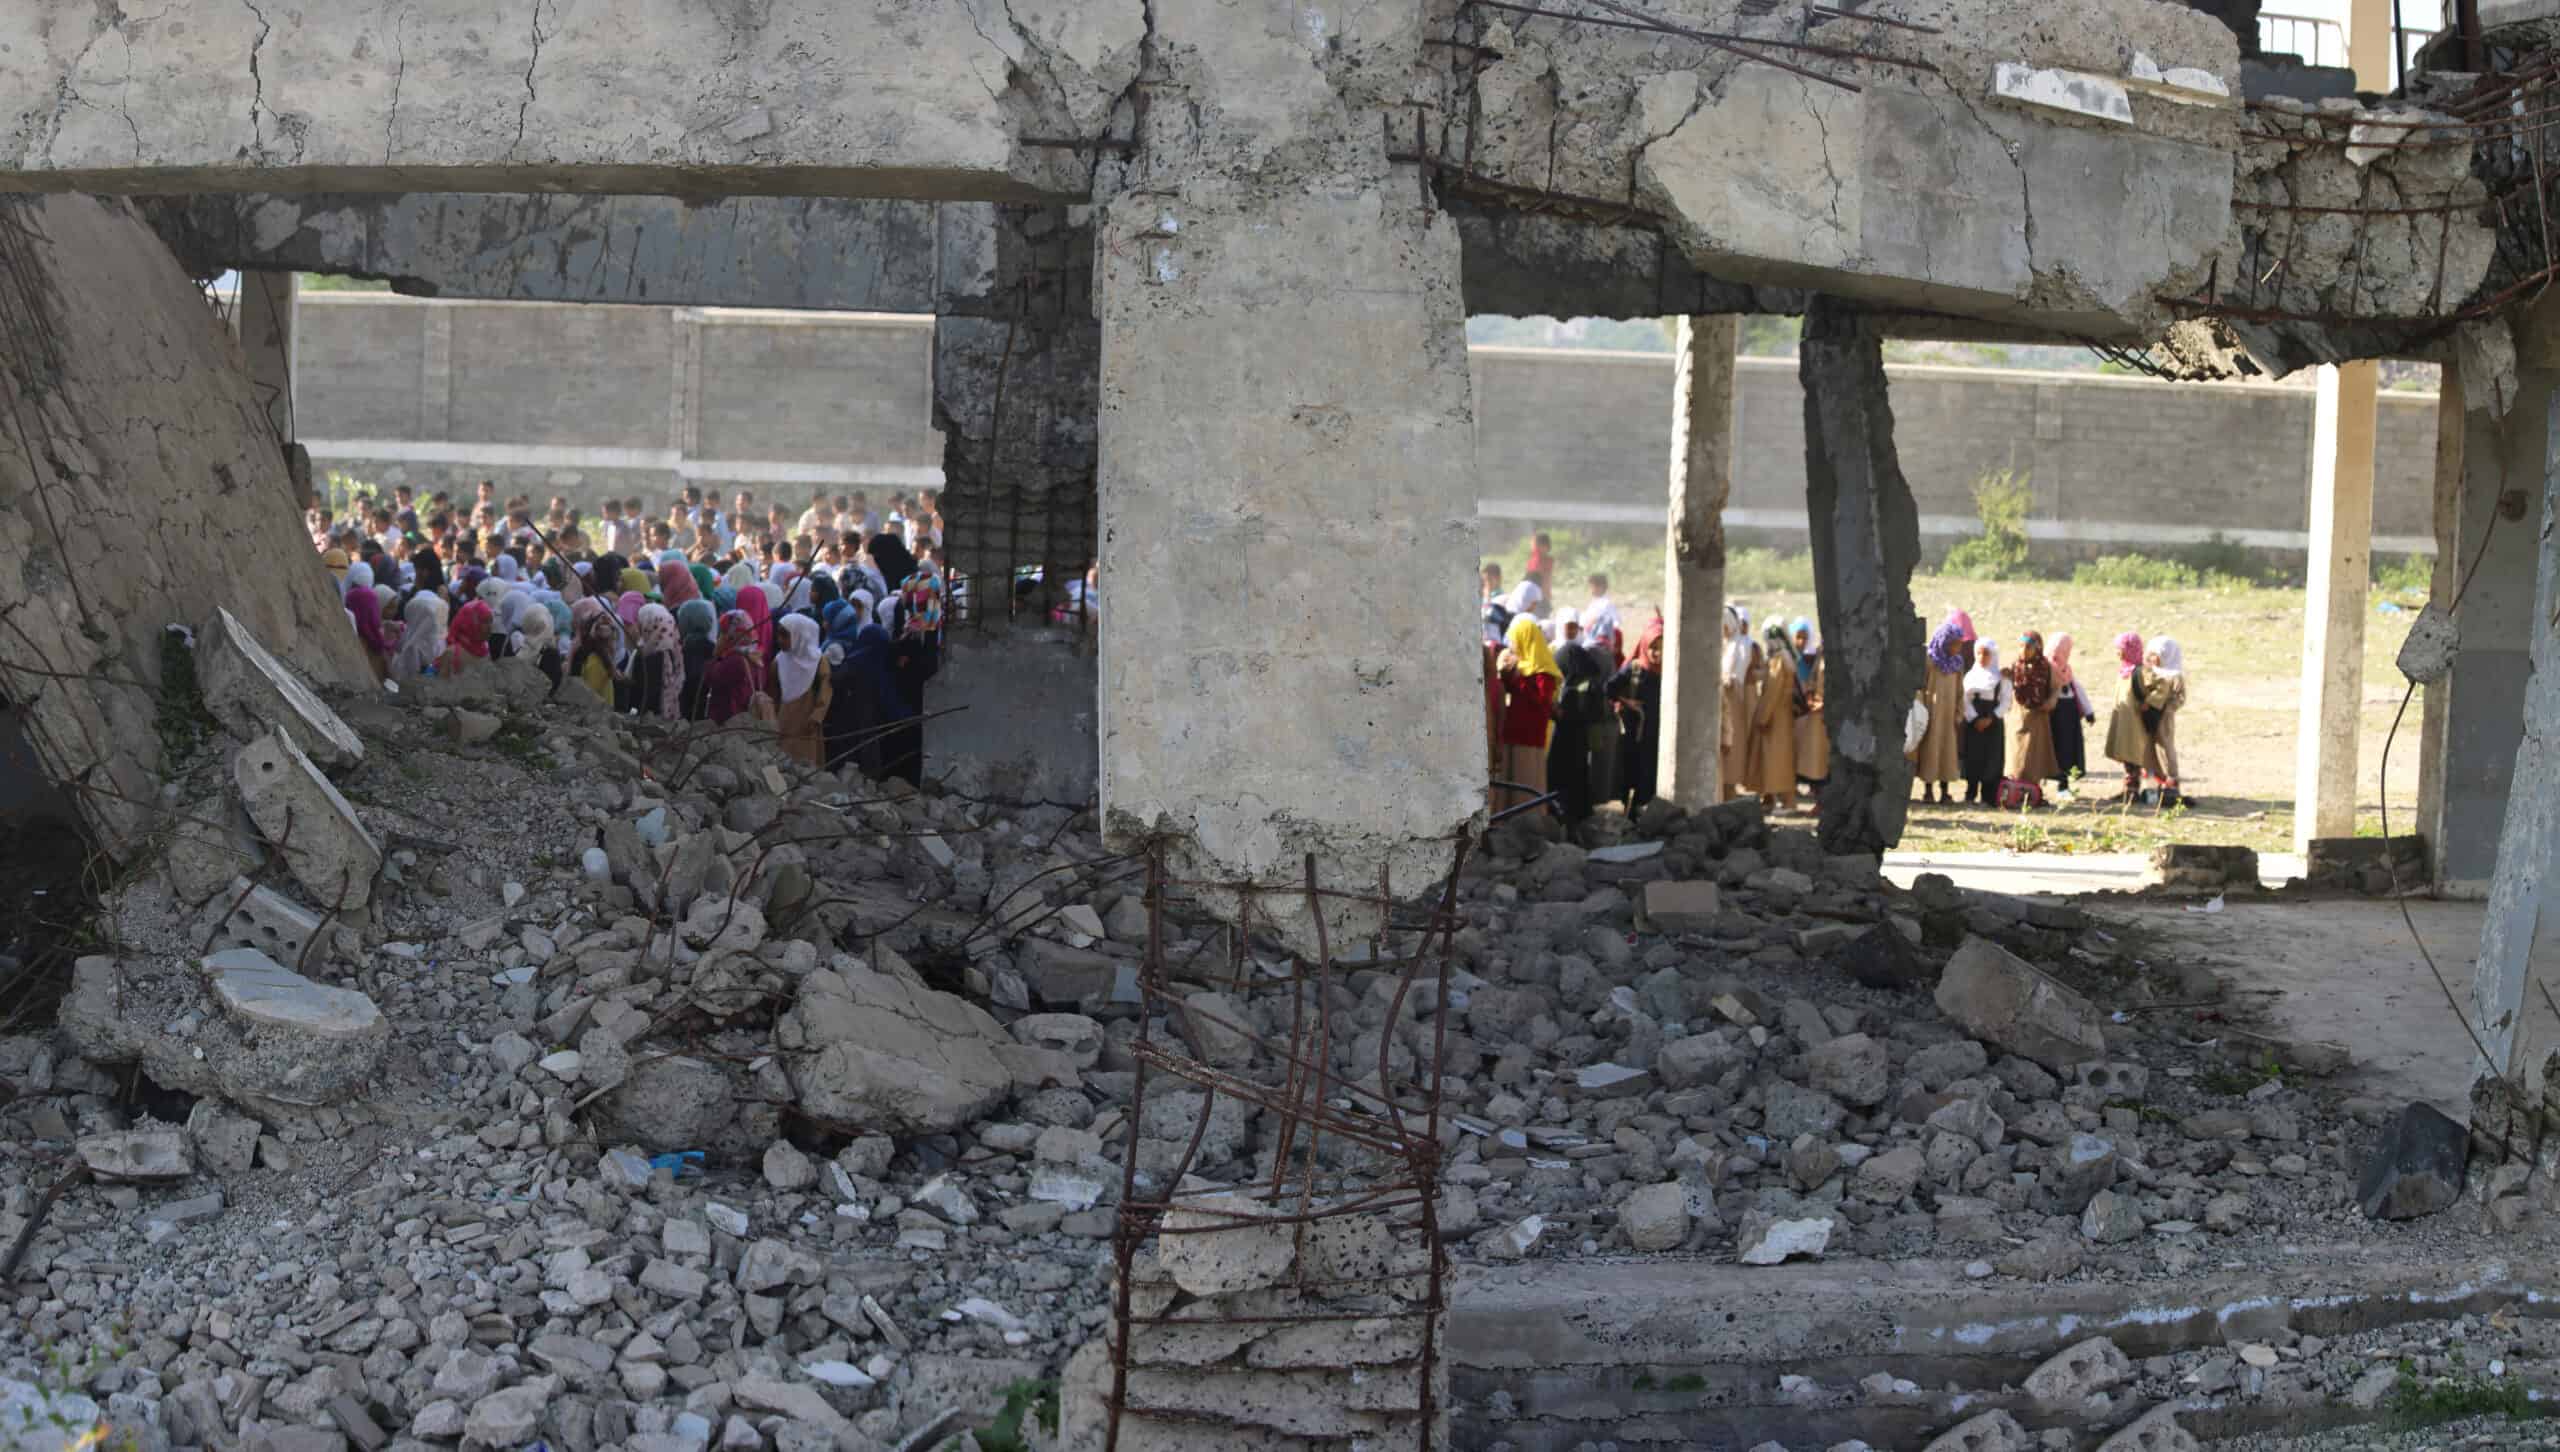 Yemeni children stand in line in the morning on the first day of school for the new year inside their school which destroyed by the war in Taiz city, Yemen